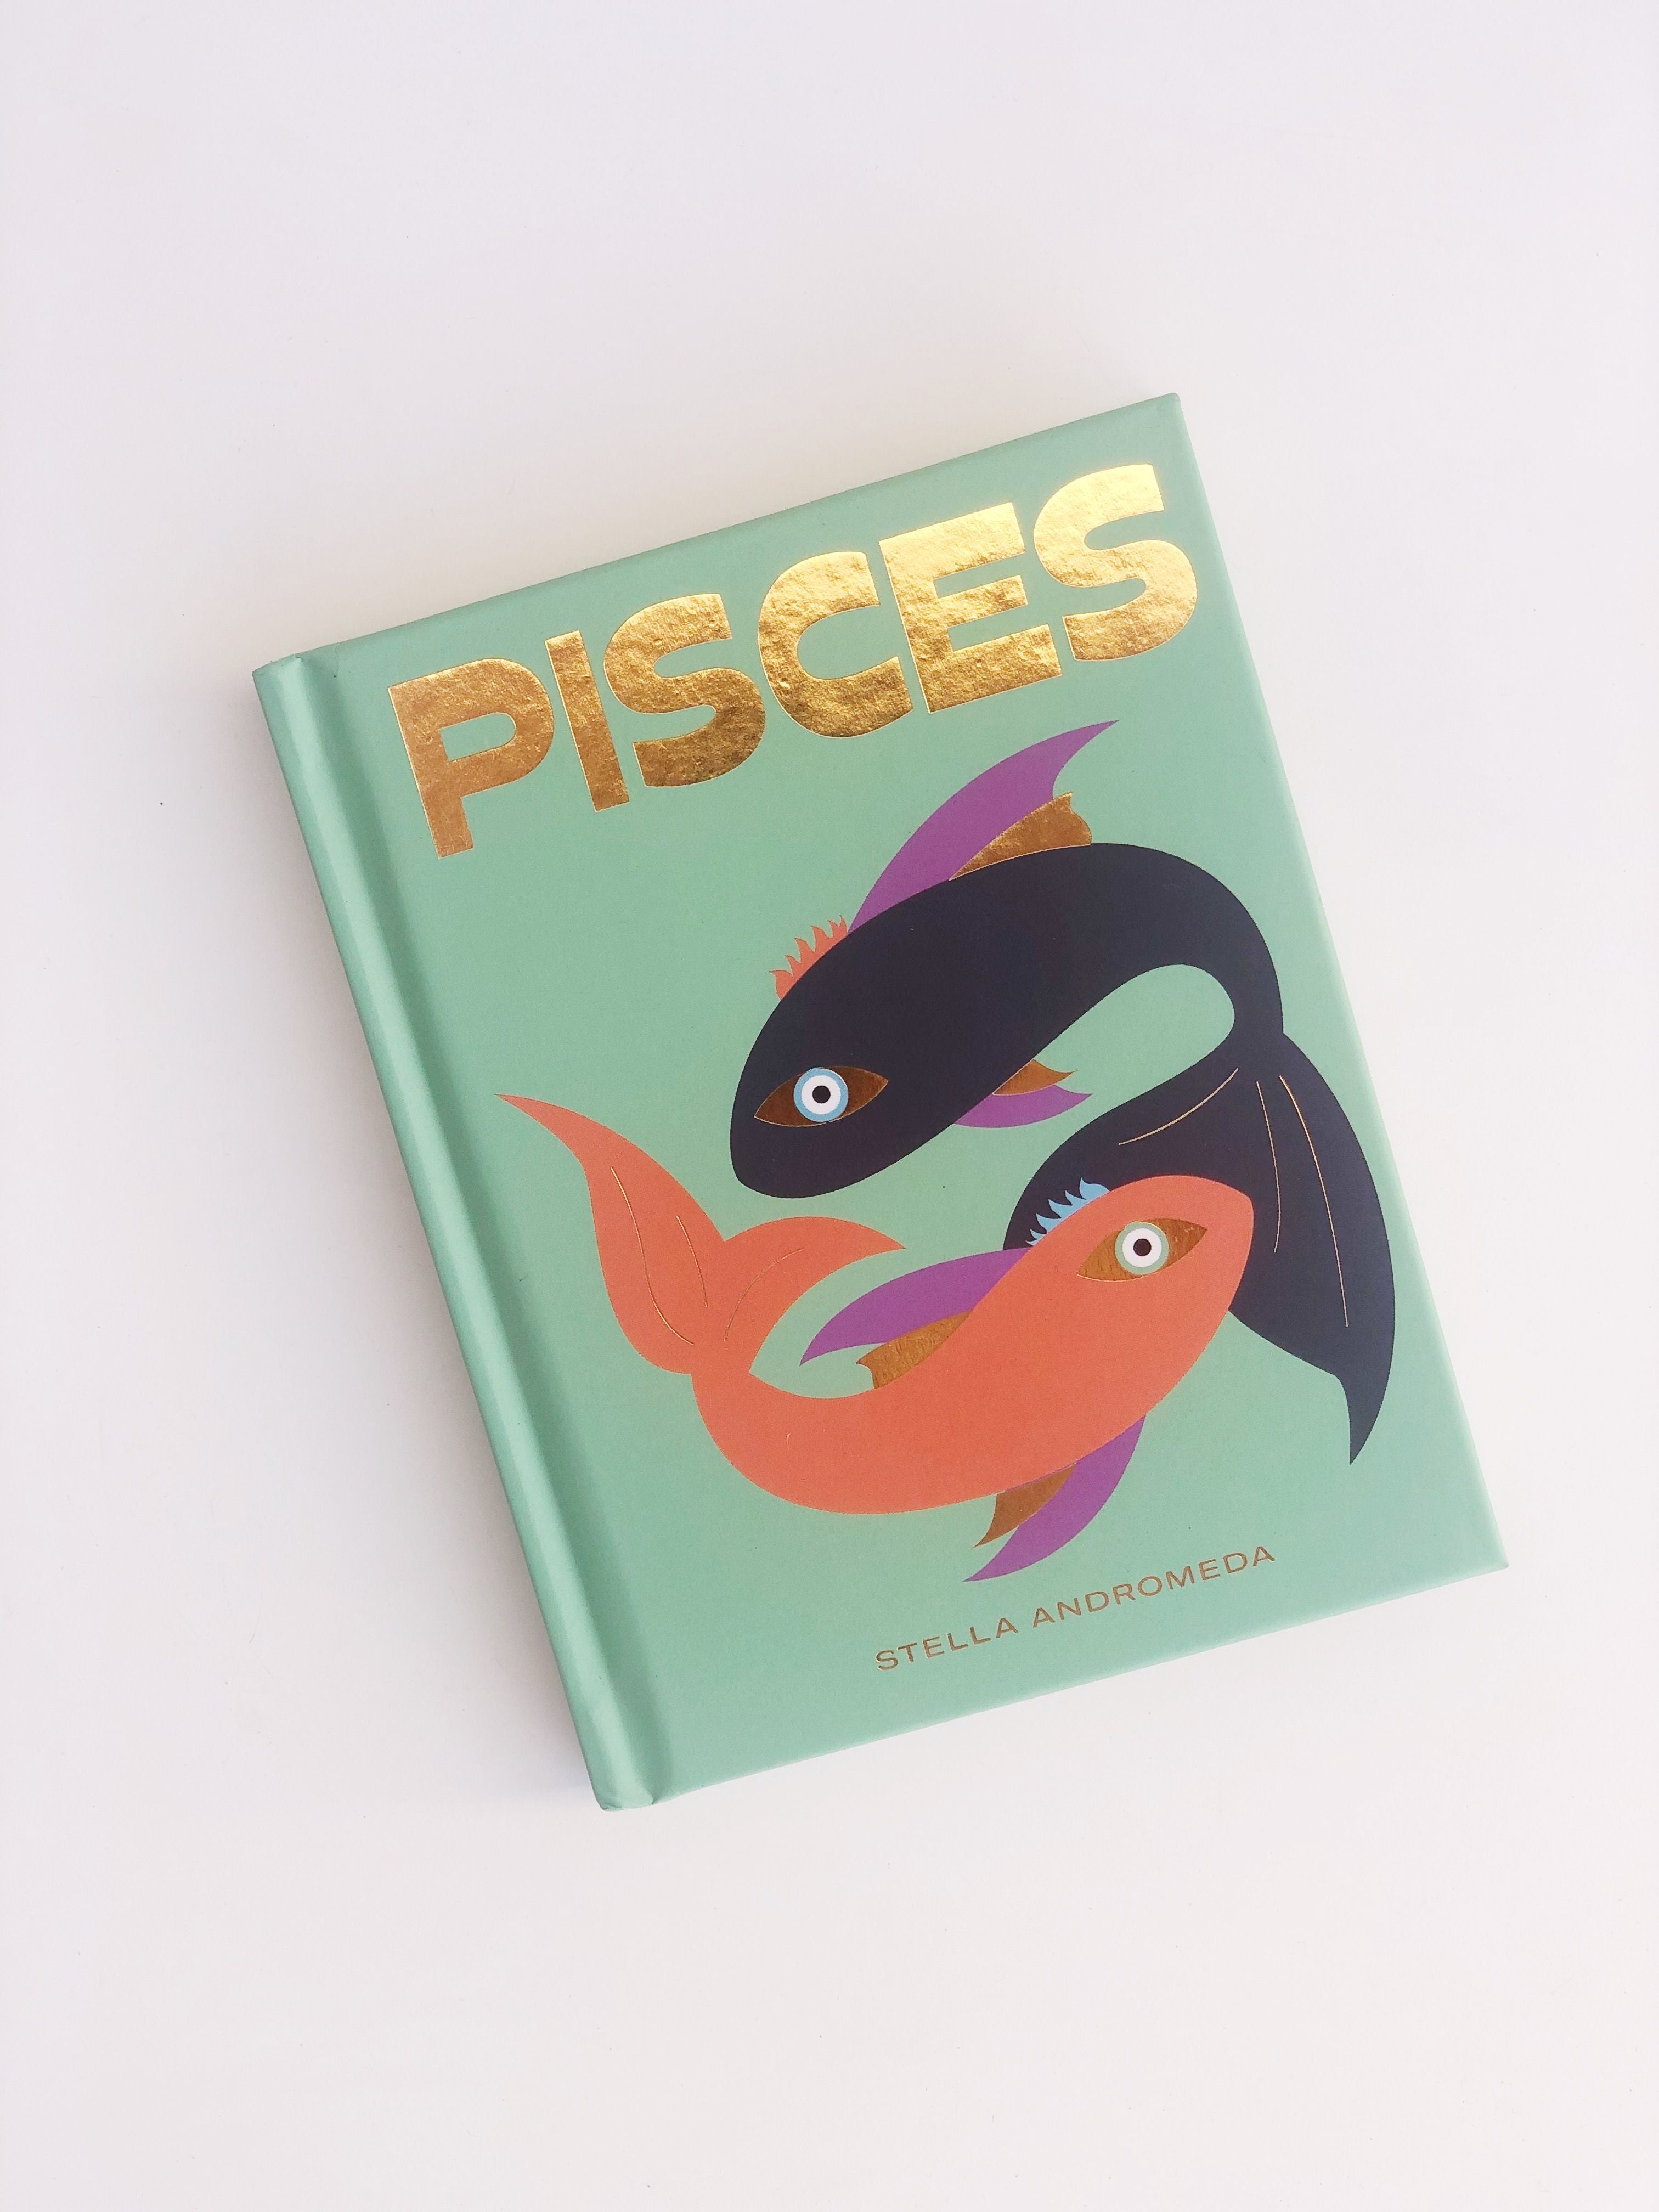 The Pisces Book